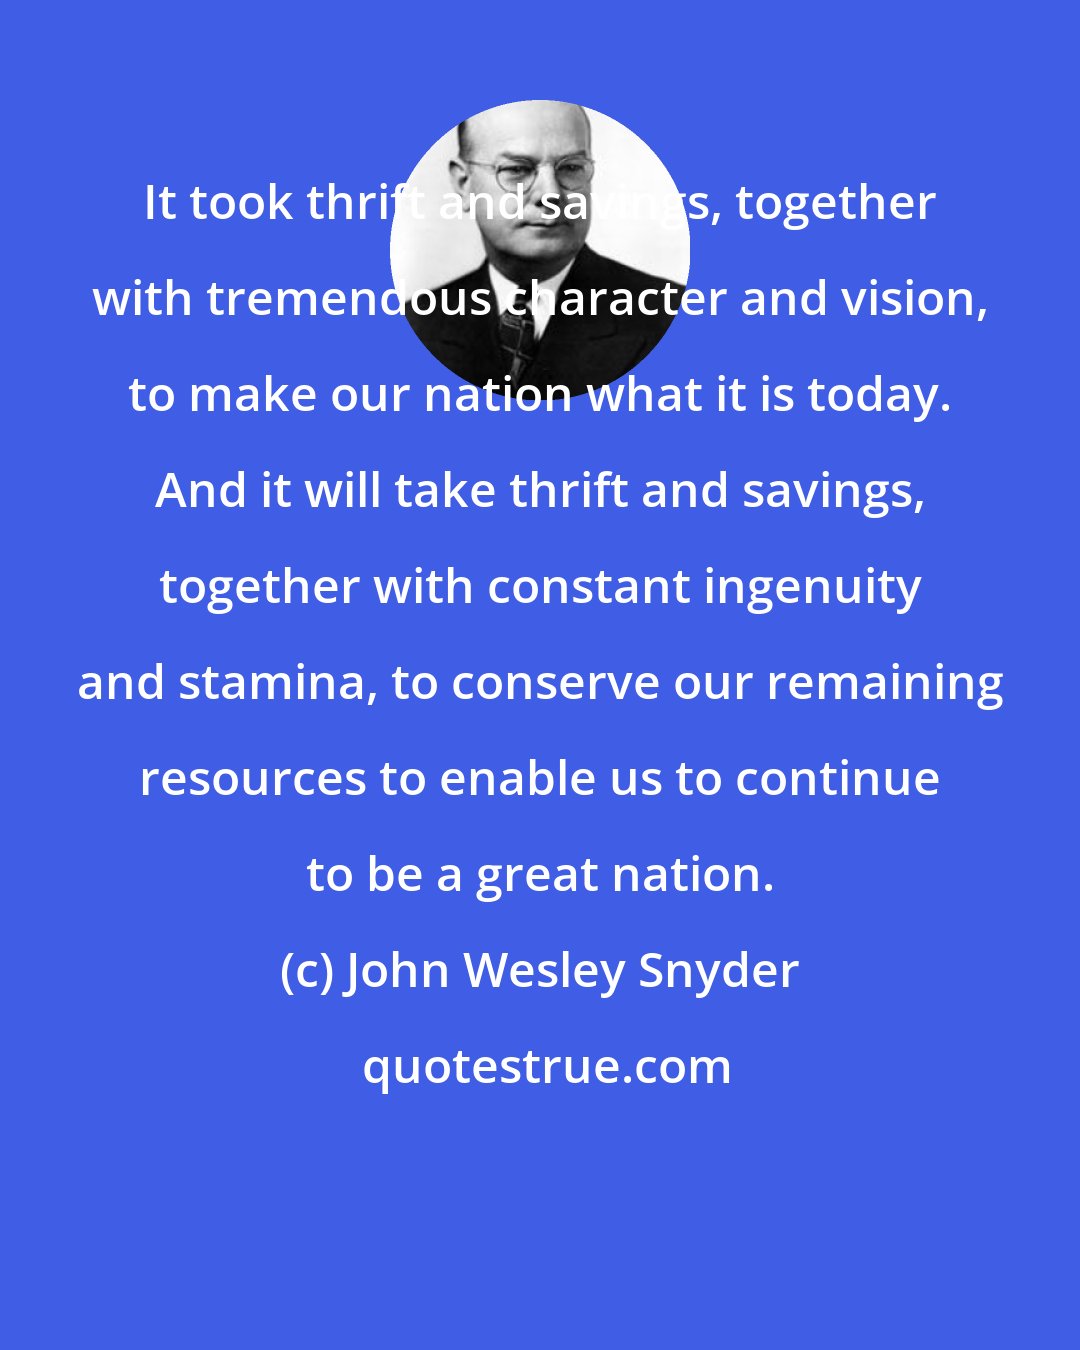 John Wesley Snyder: It took thrift and savings, together with tremendous character and vision, to make our nation what it is today. And it will take thrift and savings, together with constant ingenuity and stamina, to conserve our remaining resources to enable us to continue to be a great nation.